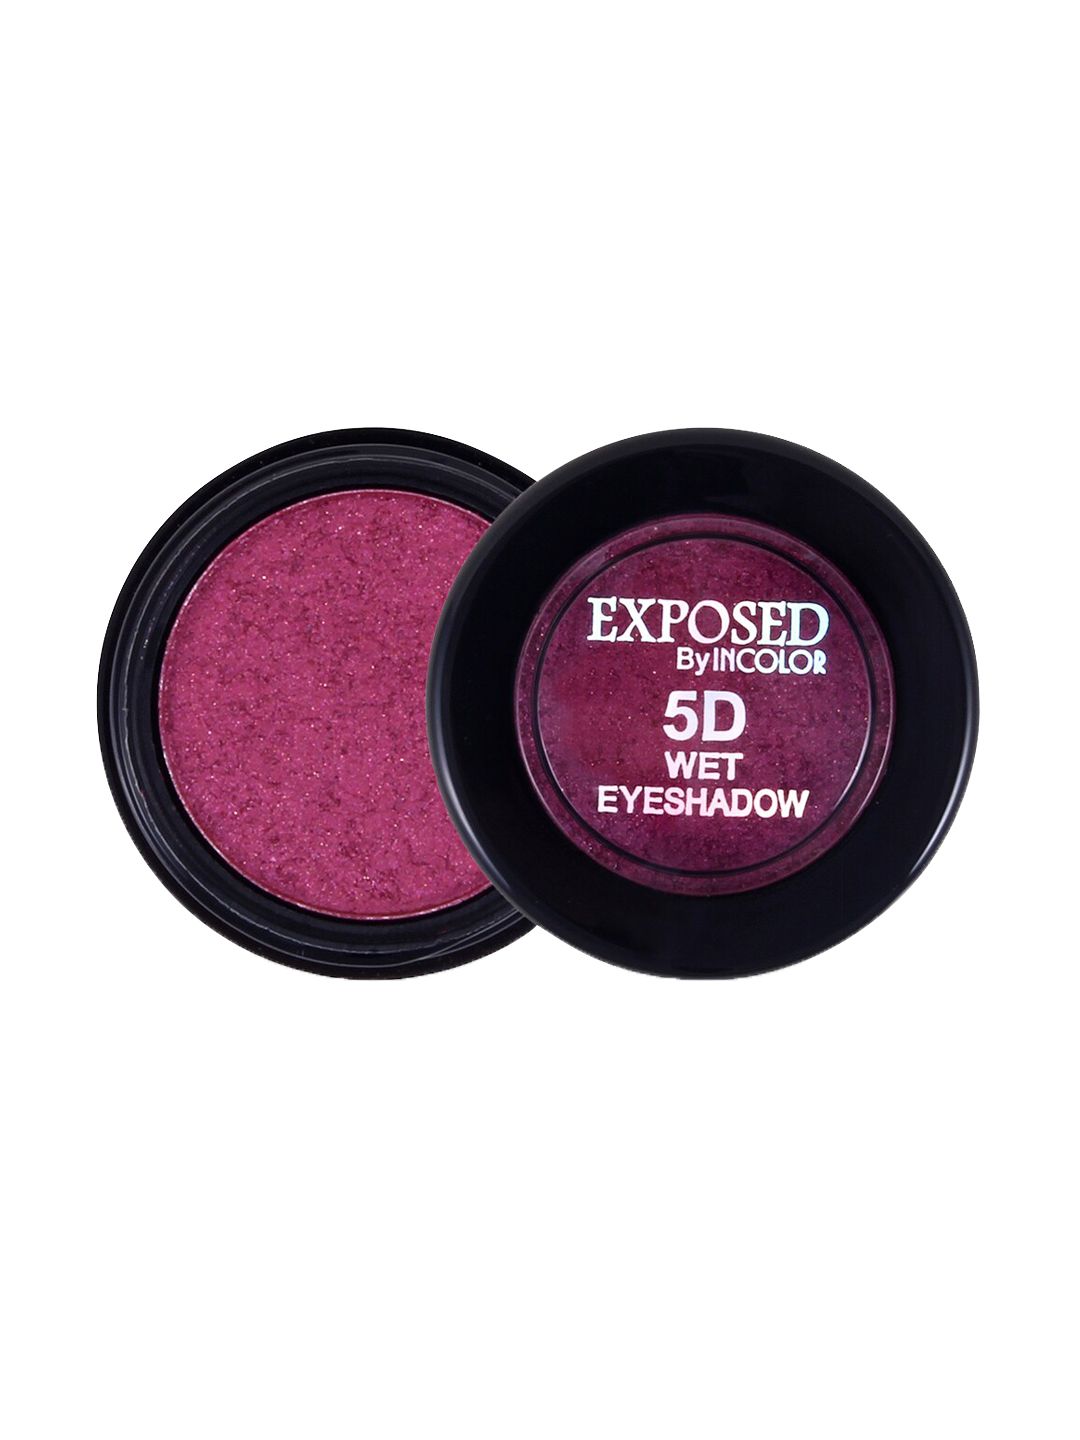 INCOLOR 5 D Wet Eyeshadow 08 4.5 gm Price in India